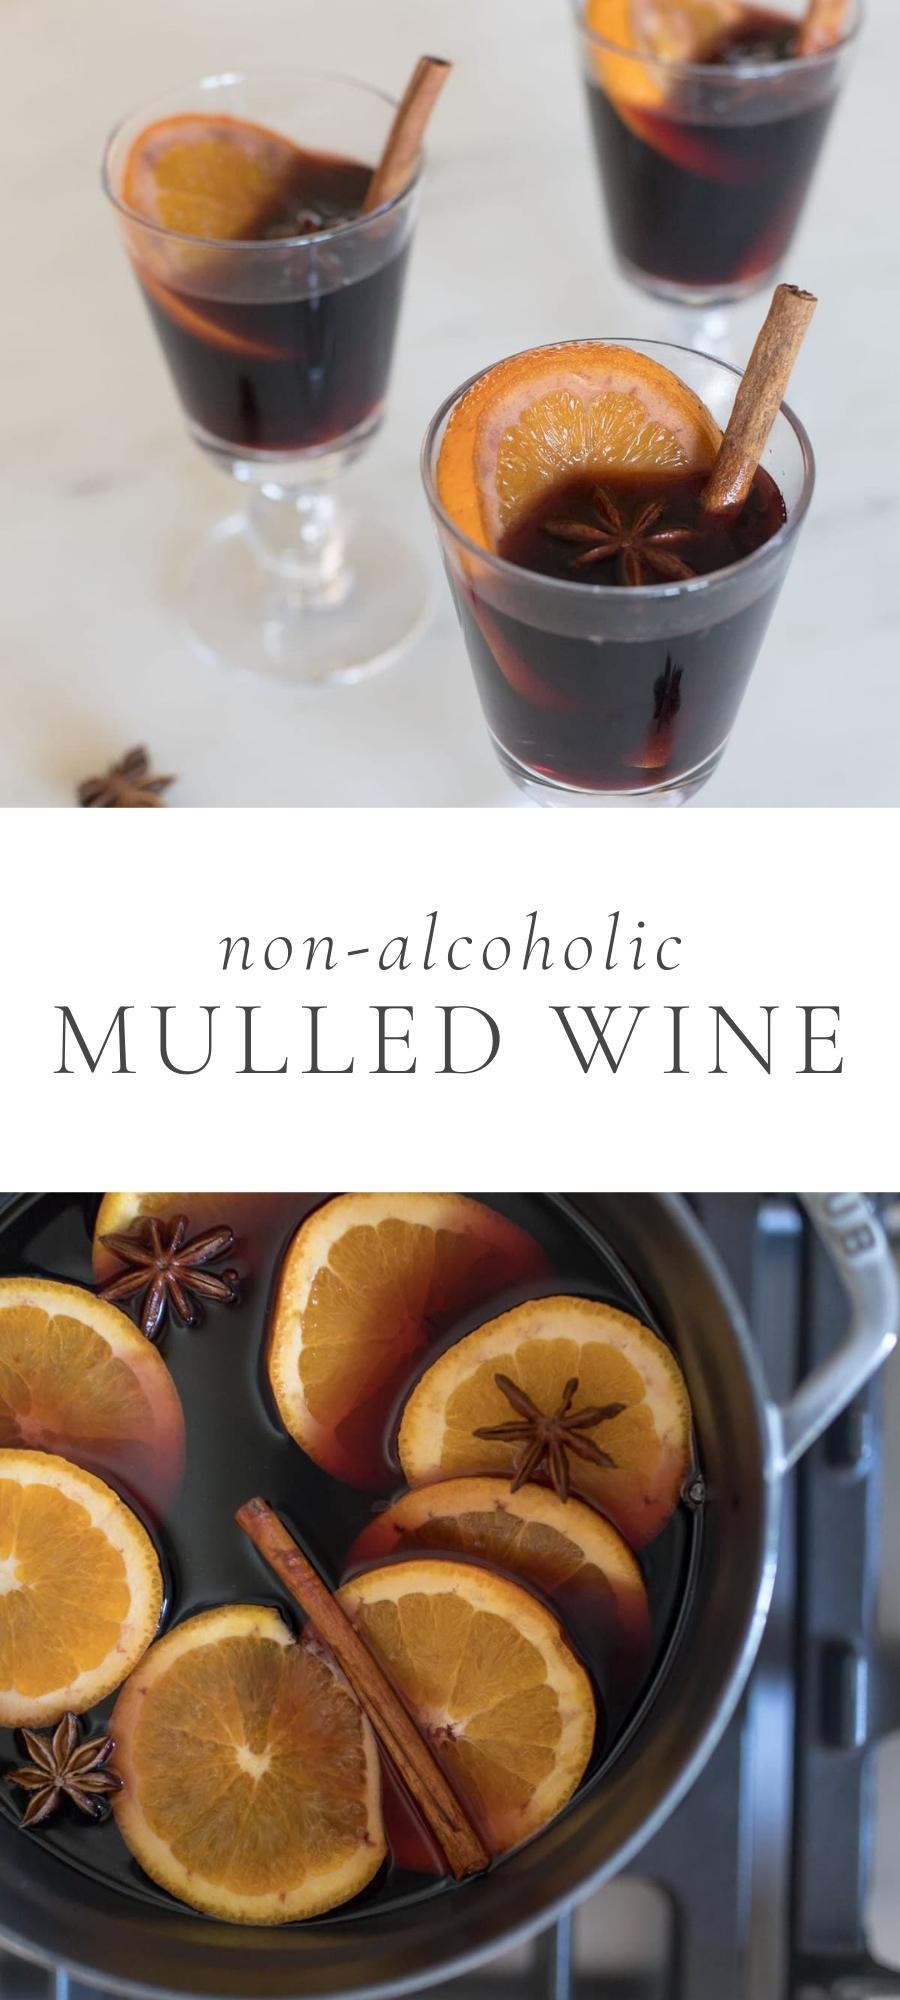 Easy Non Alcoholic Mulled Wine For The Holidays in glasses with oranges and cinnamon sticks